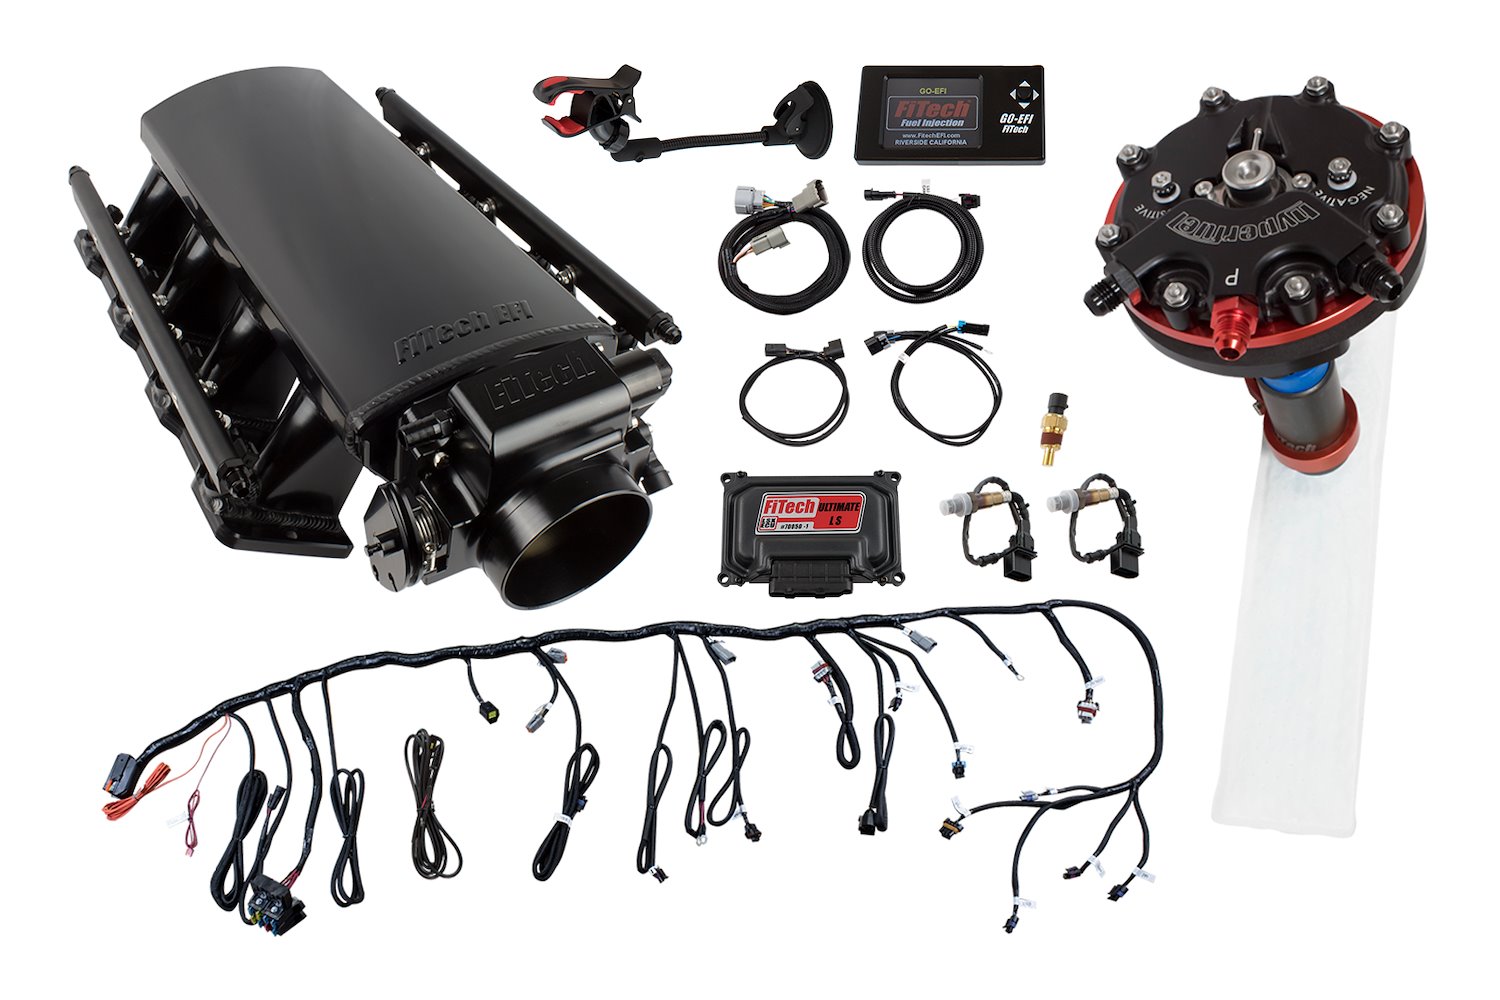 Ultimate LS EFI Induction System LS1/LS2/LS6 500 HP with Hy-Fuel Single Pump Regulated In-Tank Retrofit Kit